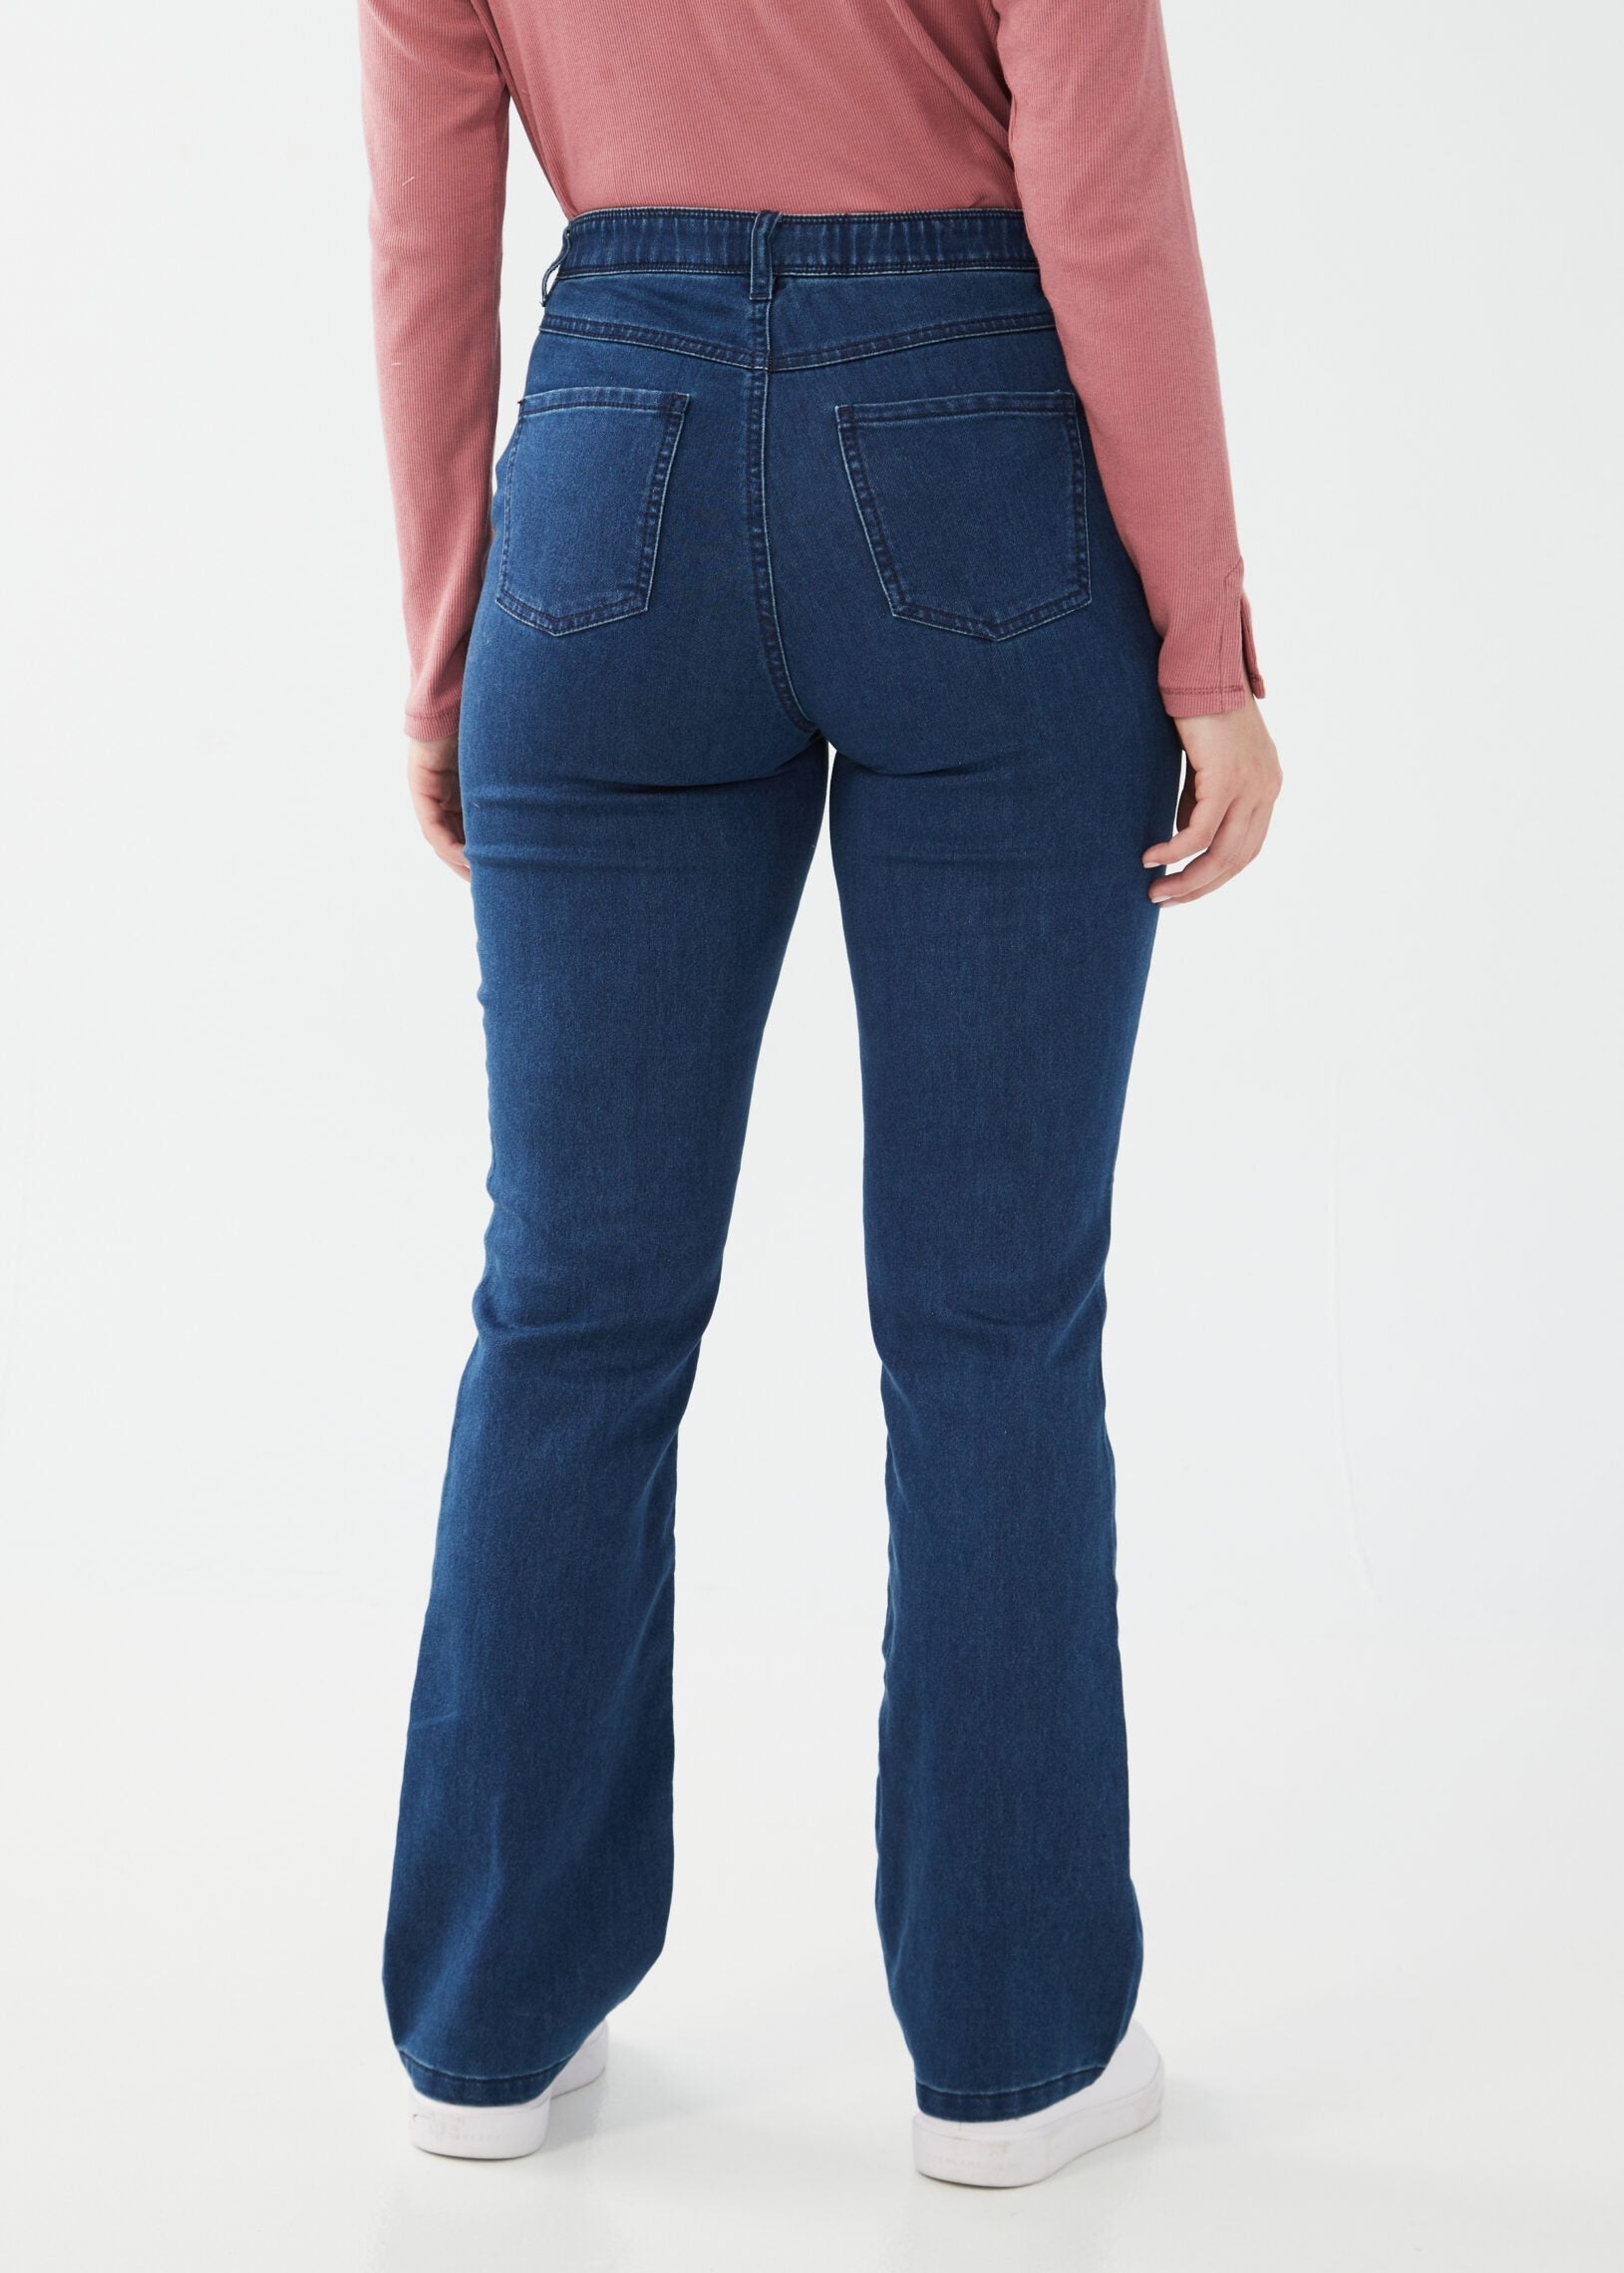 The PETITE Suzanne Bootleg Denim is a timeless and classic pair of jeans that brings sophistication and flair to your wardrobe. 